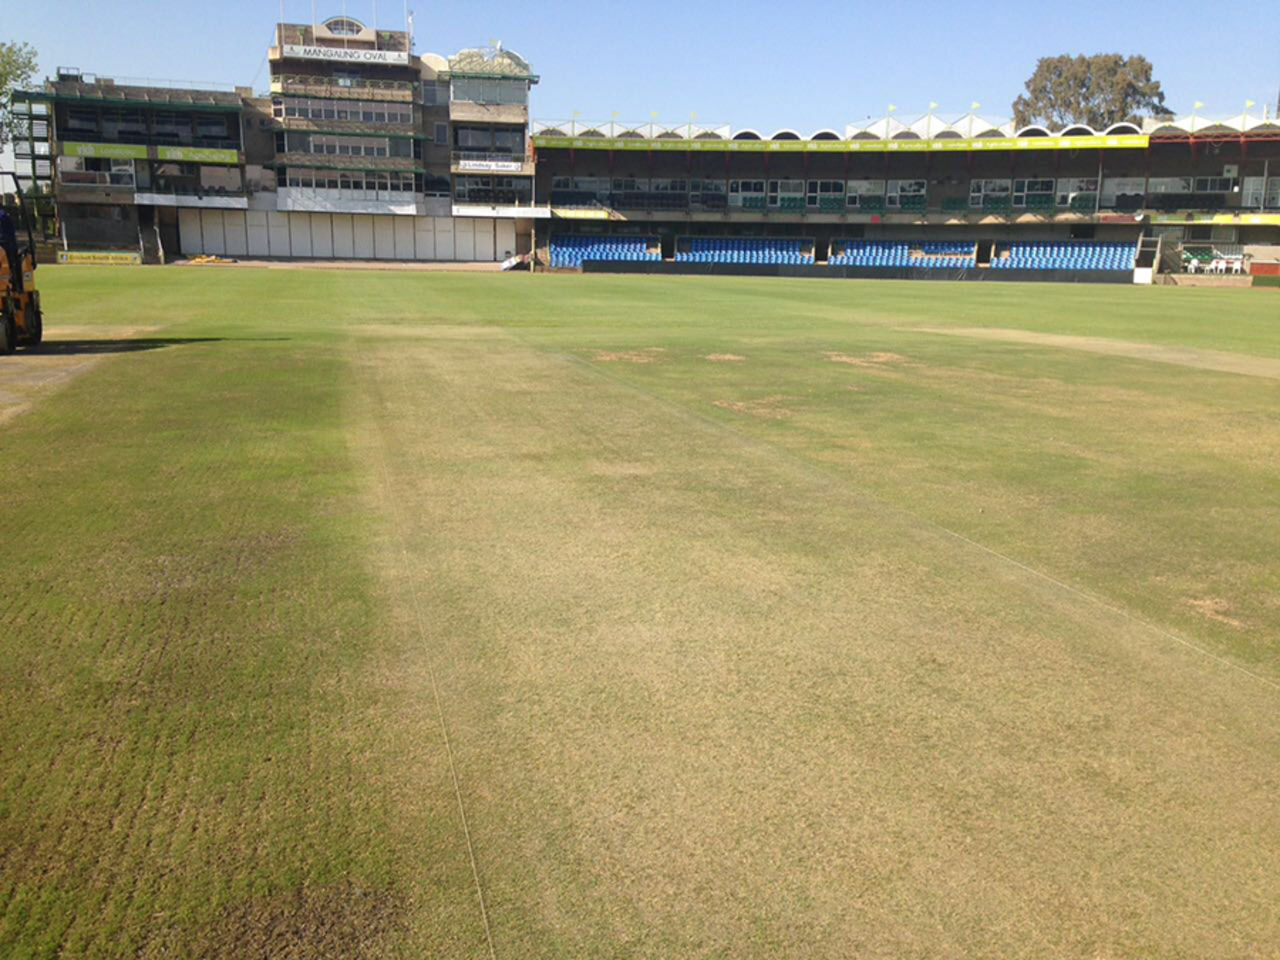 A view of the pitch at the Mangaung Oval a few days before the second Test, Bloemfontein, October 4, 2017